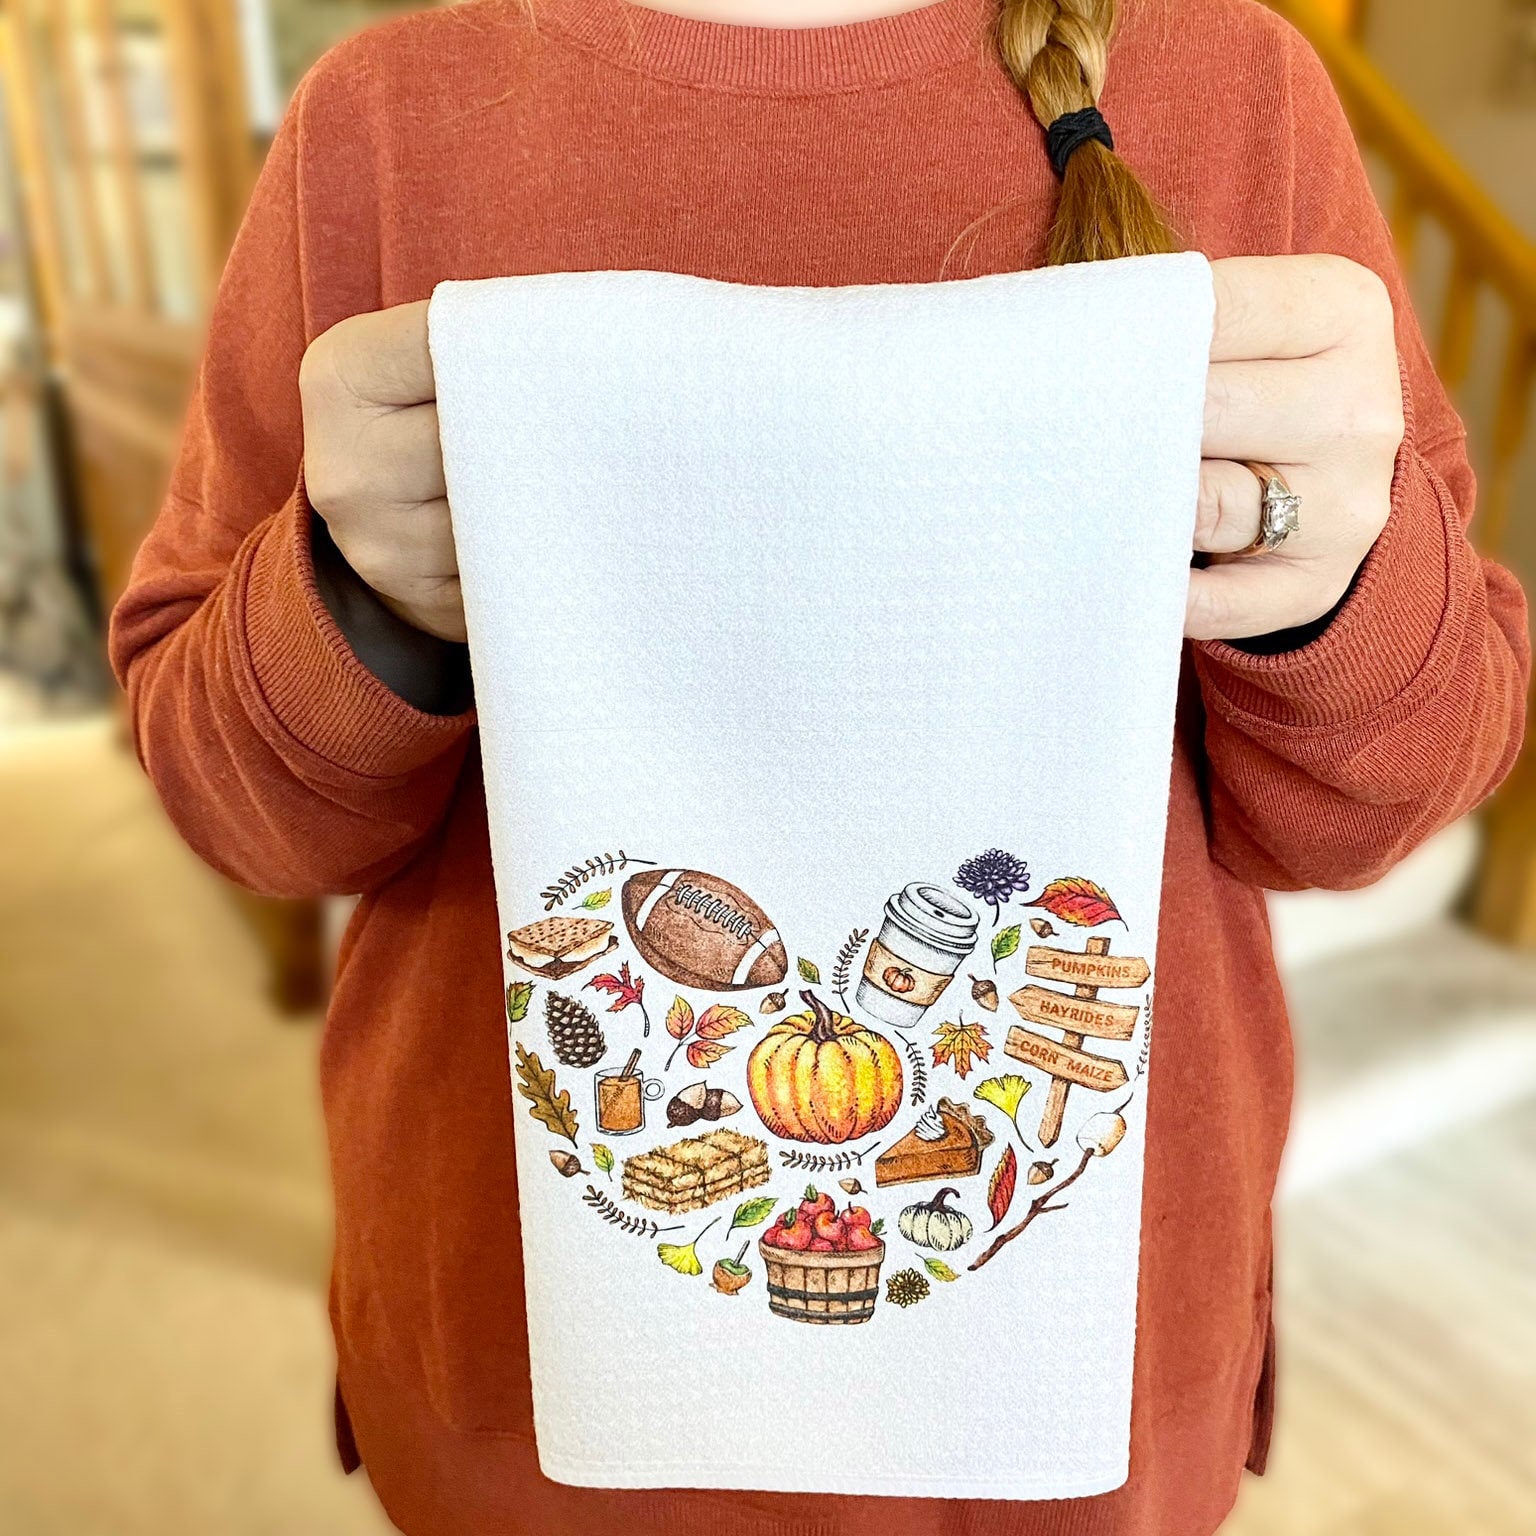 Super cute white Dishtowel with a watercolor collage of fall favorites including pine cone, leaves, pumpkins, smores, haybale, cider, caramel apple, pumpkin pie, pumpkin spice latte, a marshmallow on a stick, acorns and more!